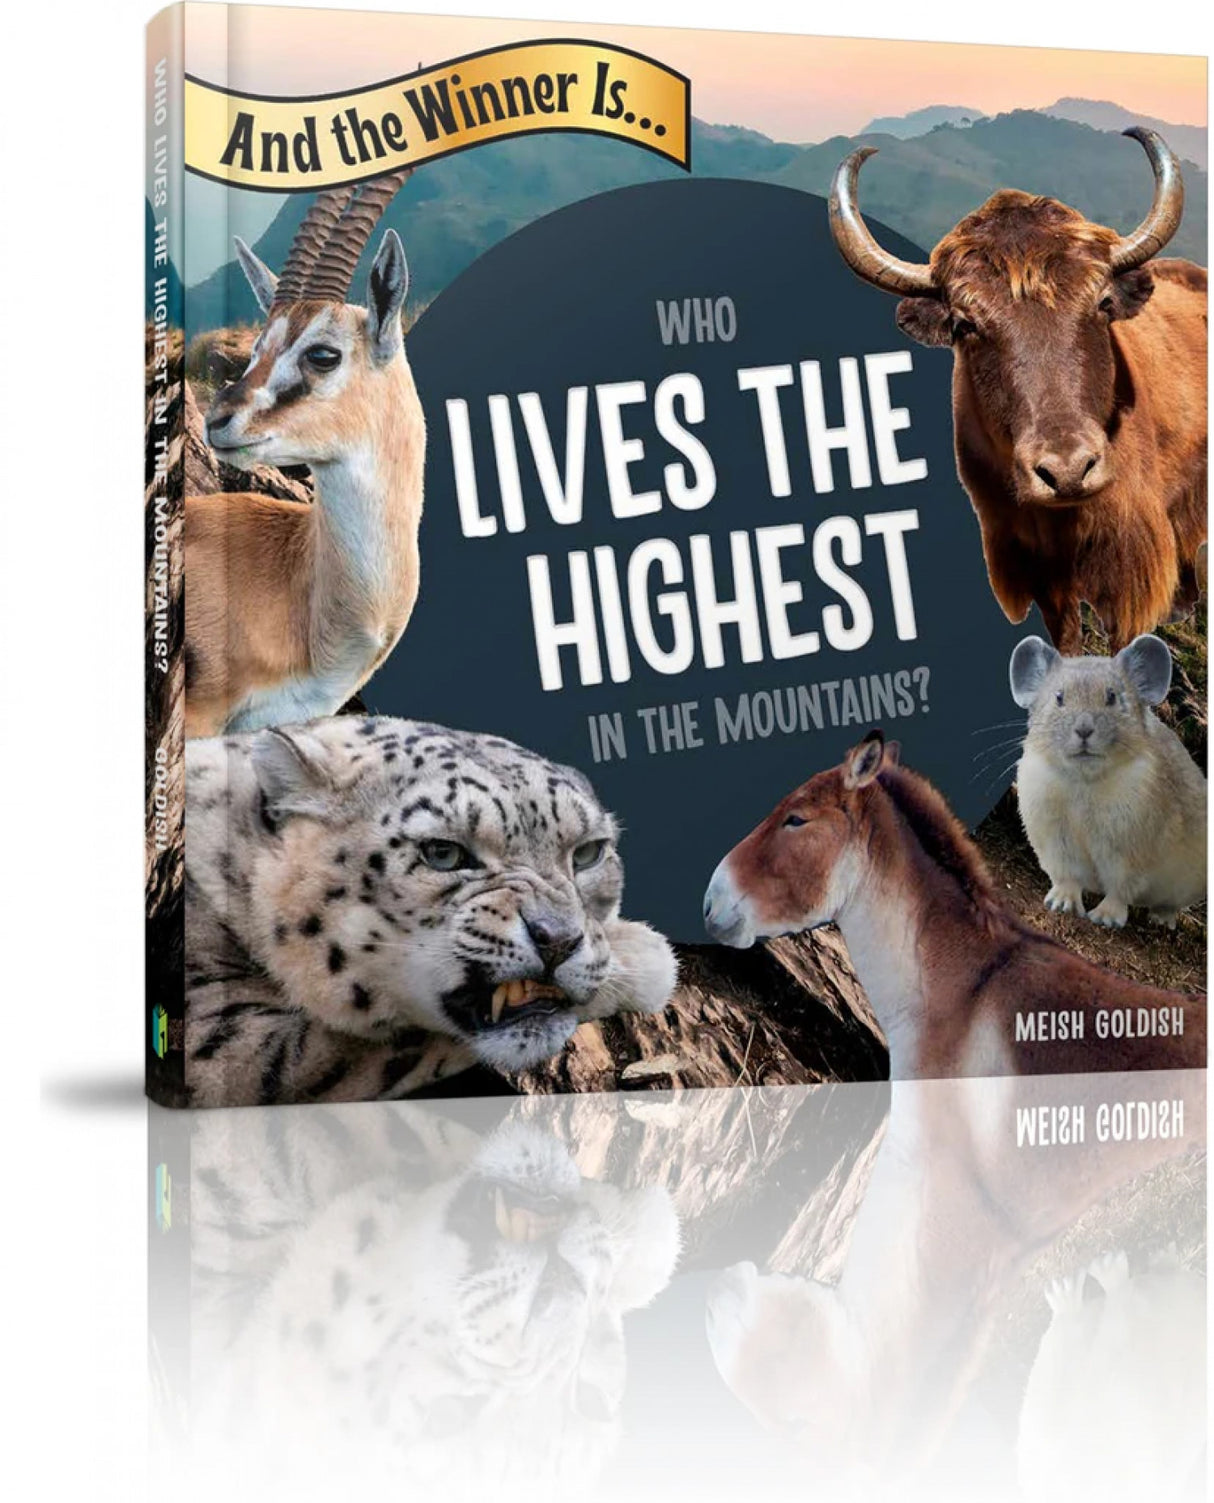 And the Winner Is...Who Lives the Highest in the Mountains?